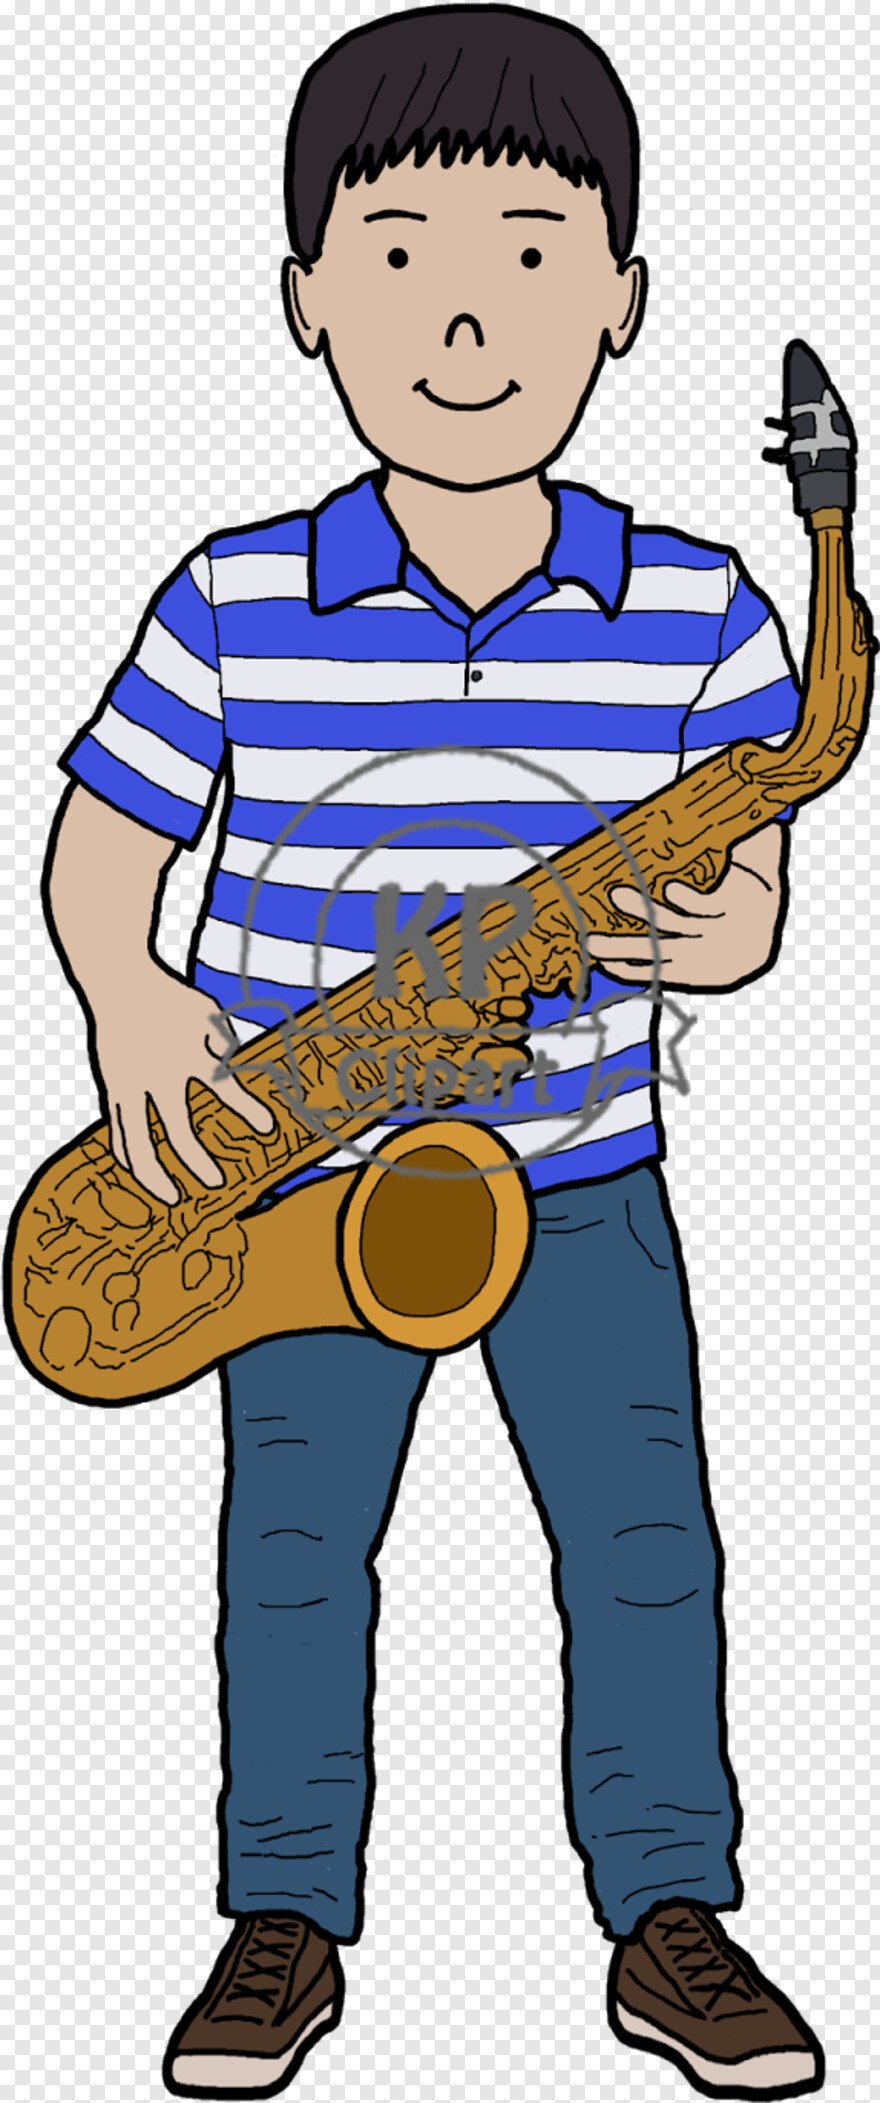 music-notes-clipart # 317883